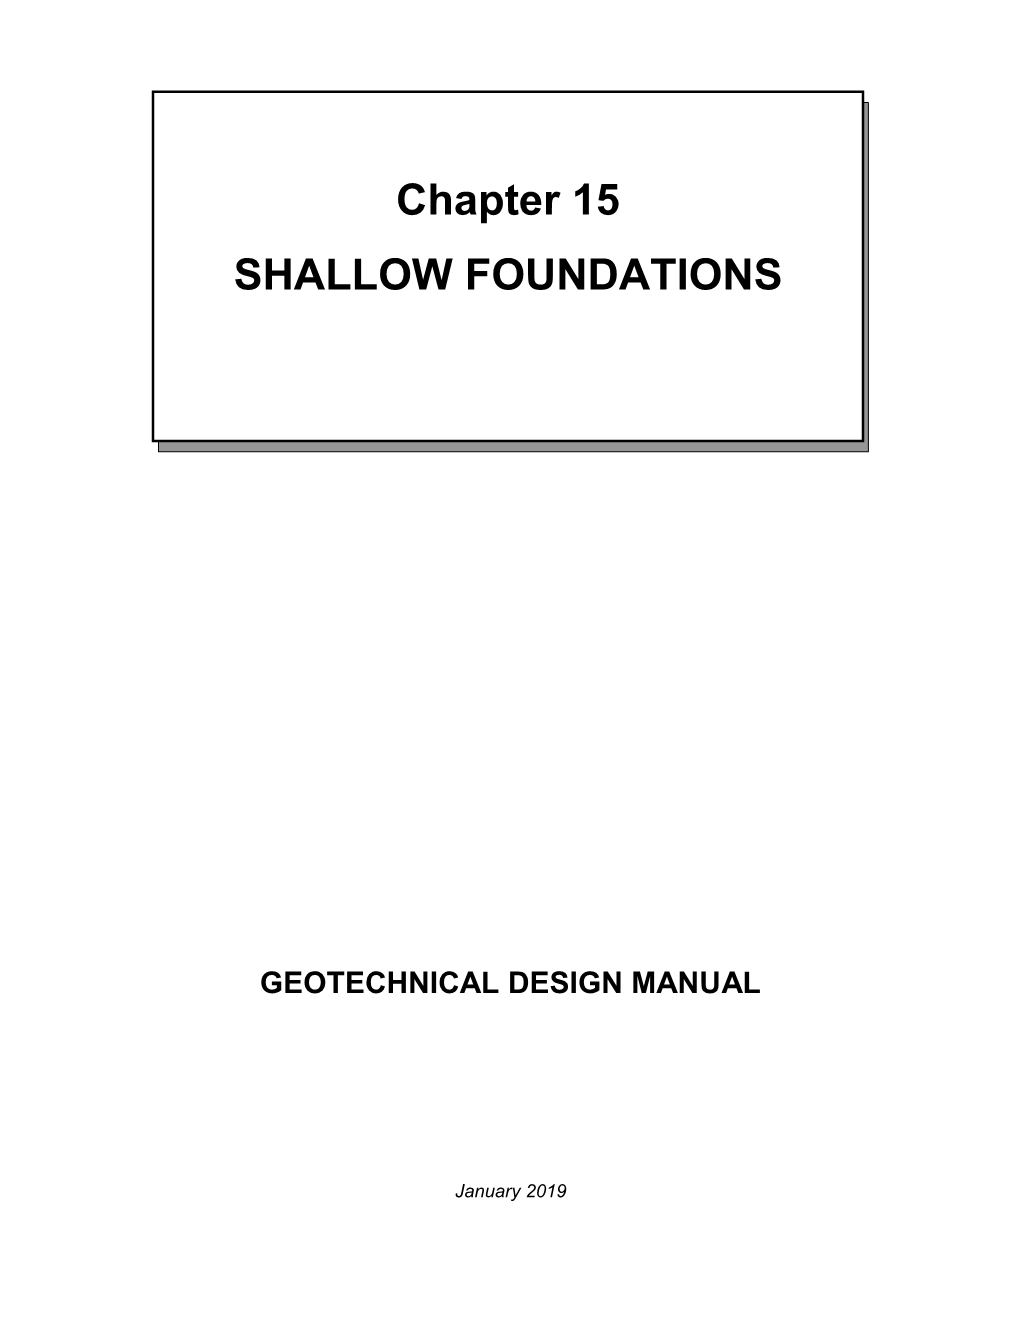 Chapter 15 – Shallow Foundations